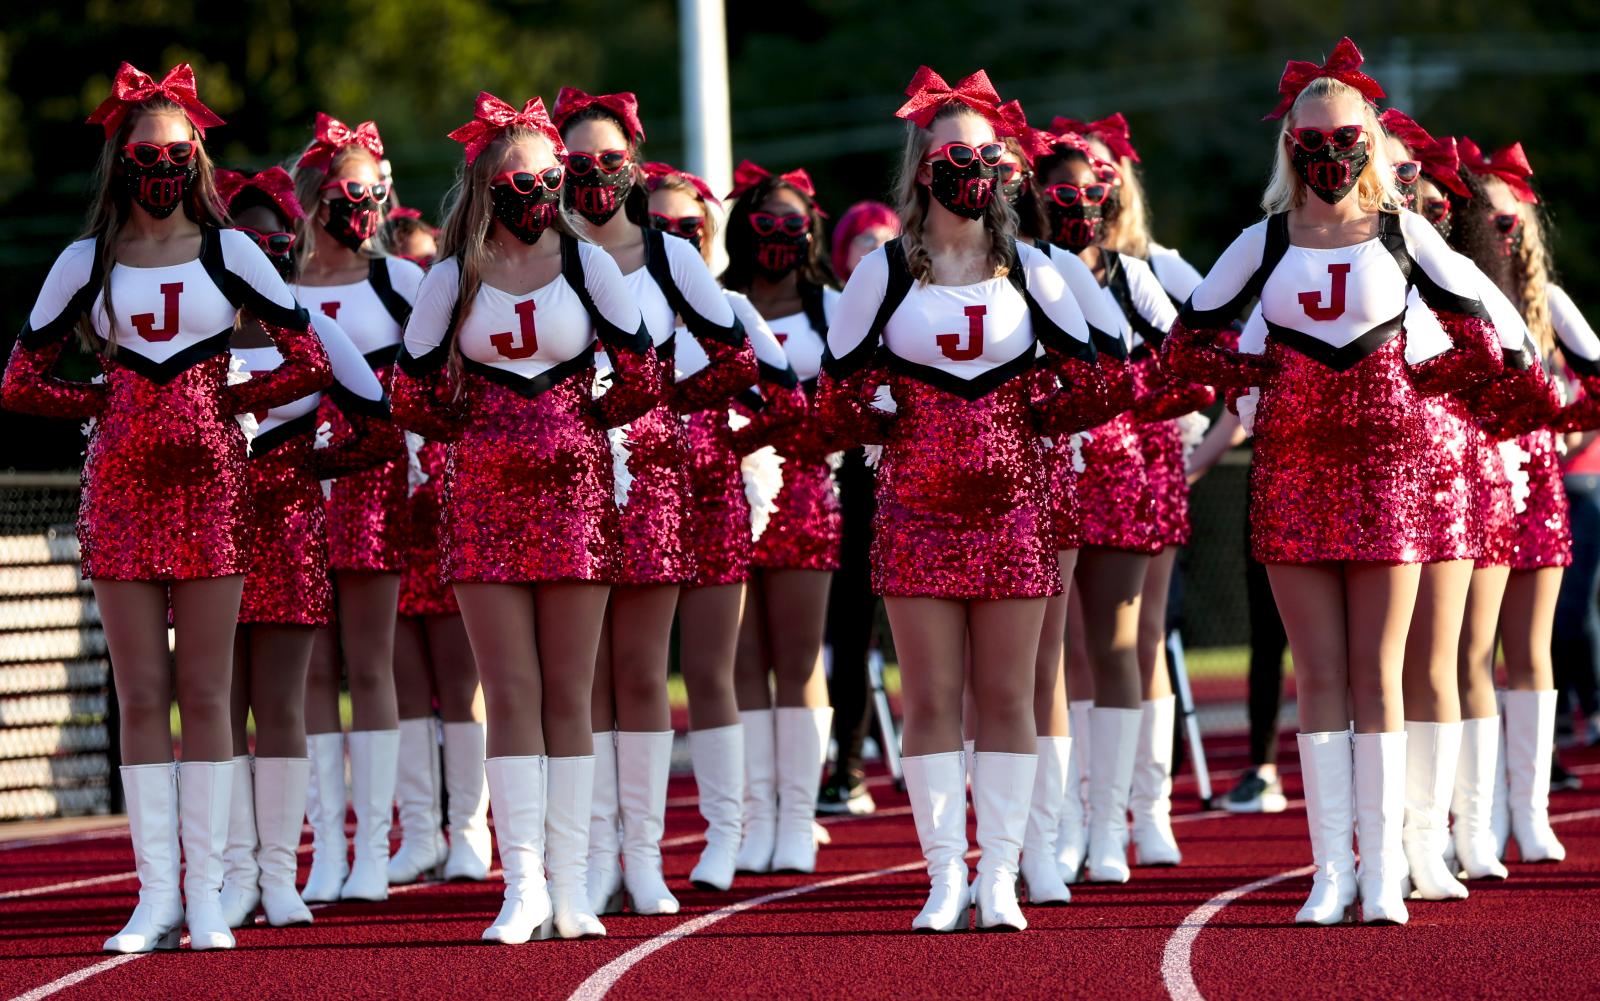 Jefferson City High School&rsquo;s dance team waits to take the field on Friday, September 4, 2020, in Jefferson City. Due to the COVID-19 pandemic, the girls all wore masks when unable to be six feet apart. &ldquo;It&rsquo;s really weird because we&rsquo;re usually so close and all together,&rdquo; senior Katrina Peter said.